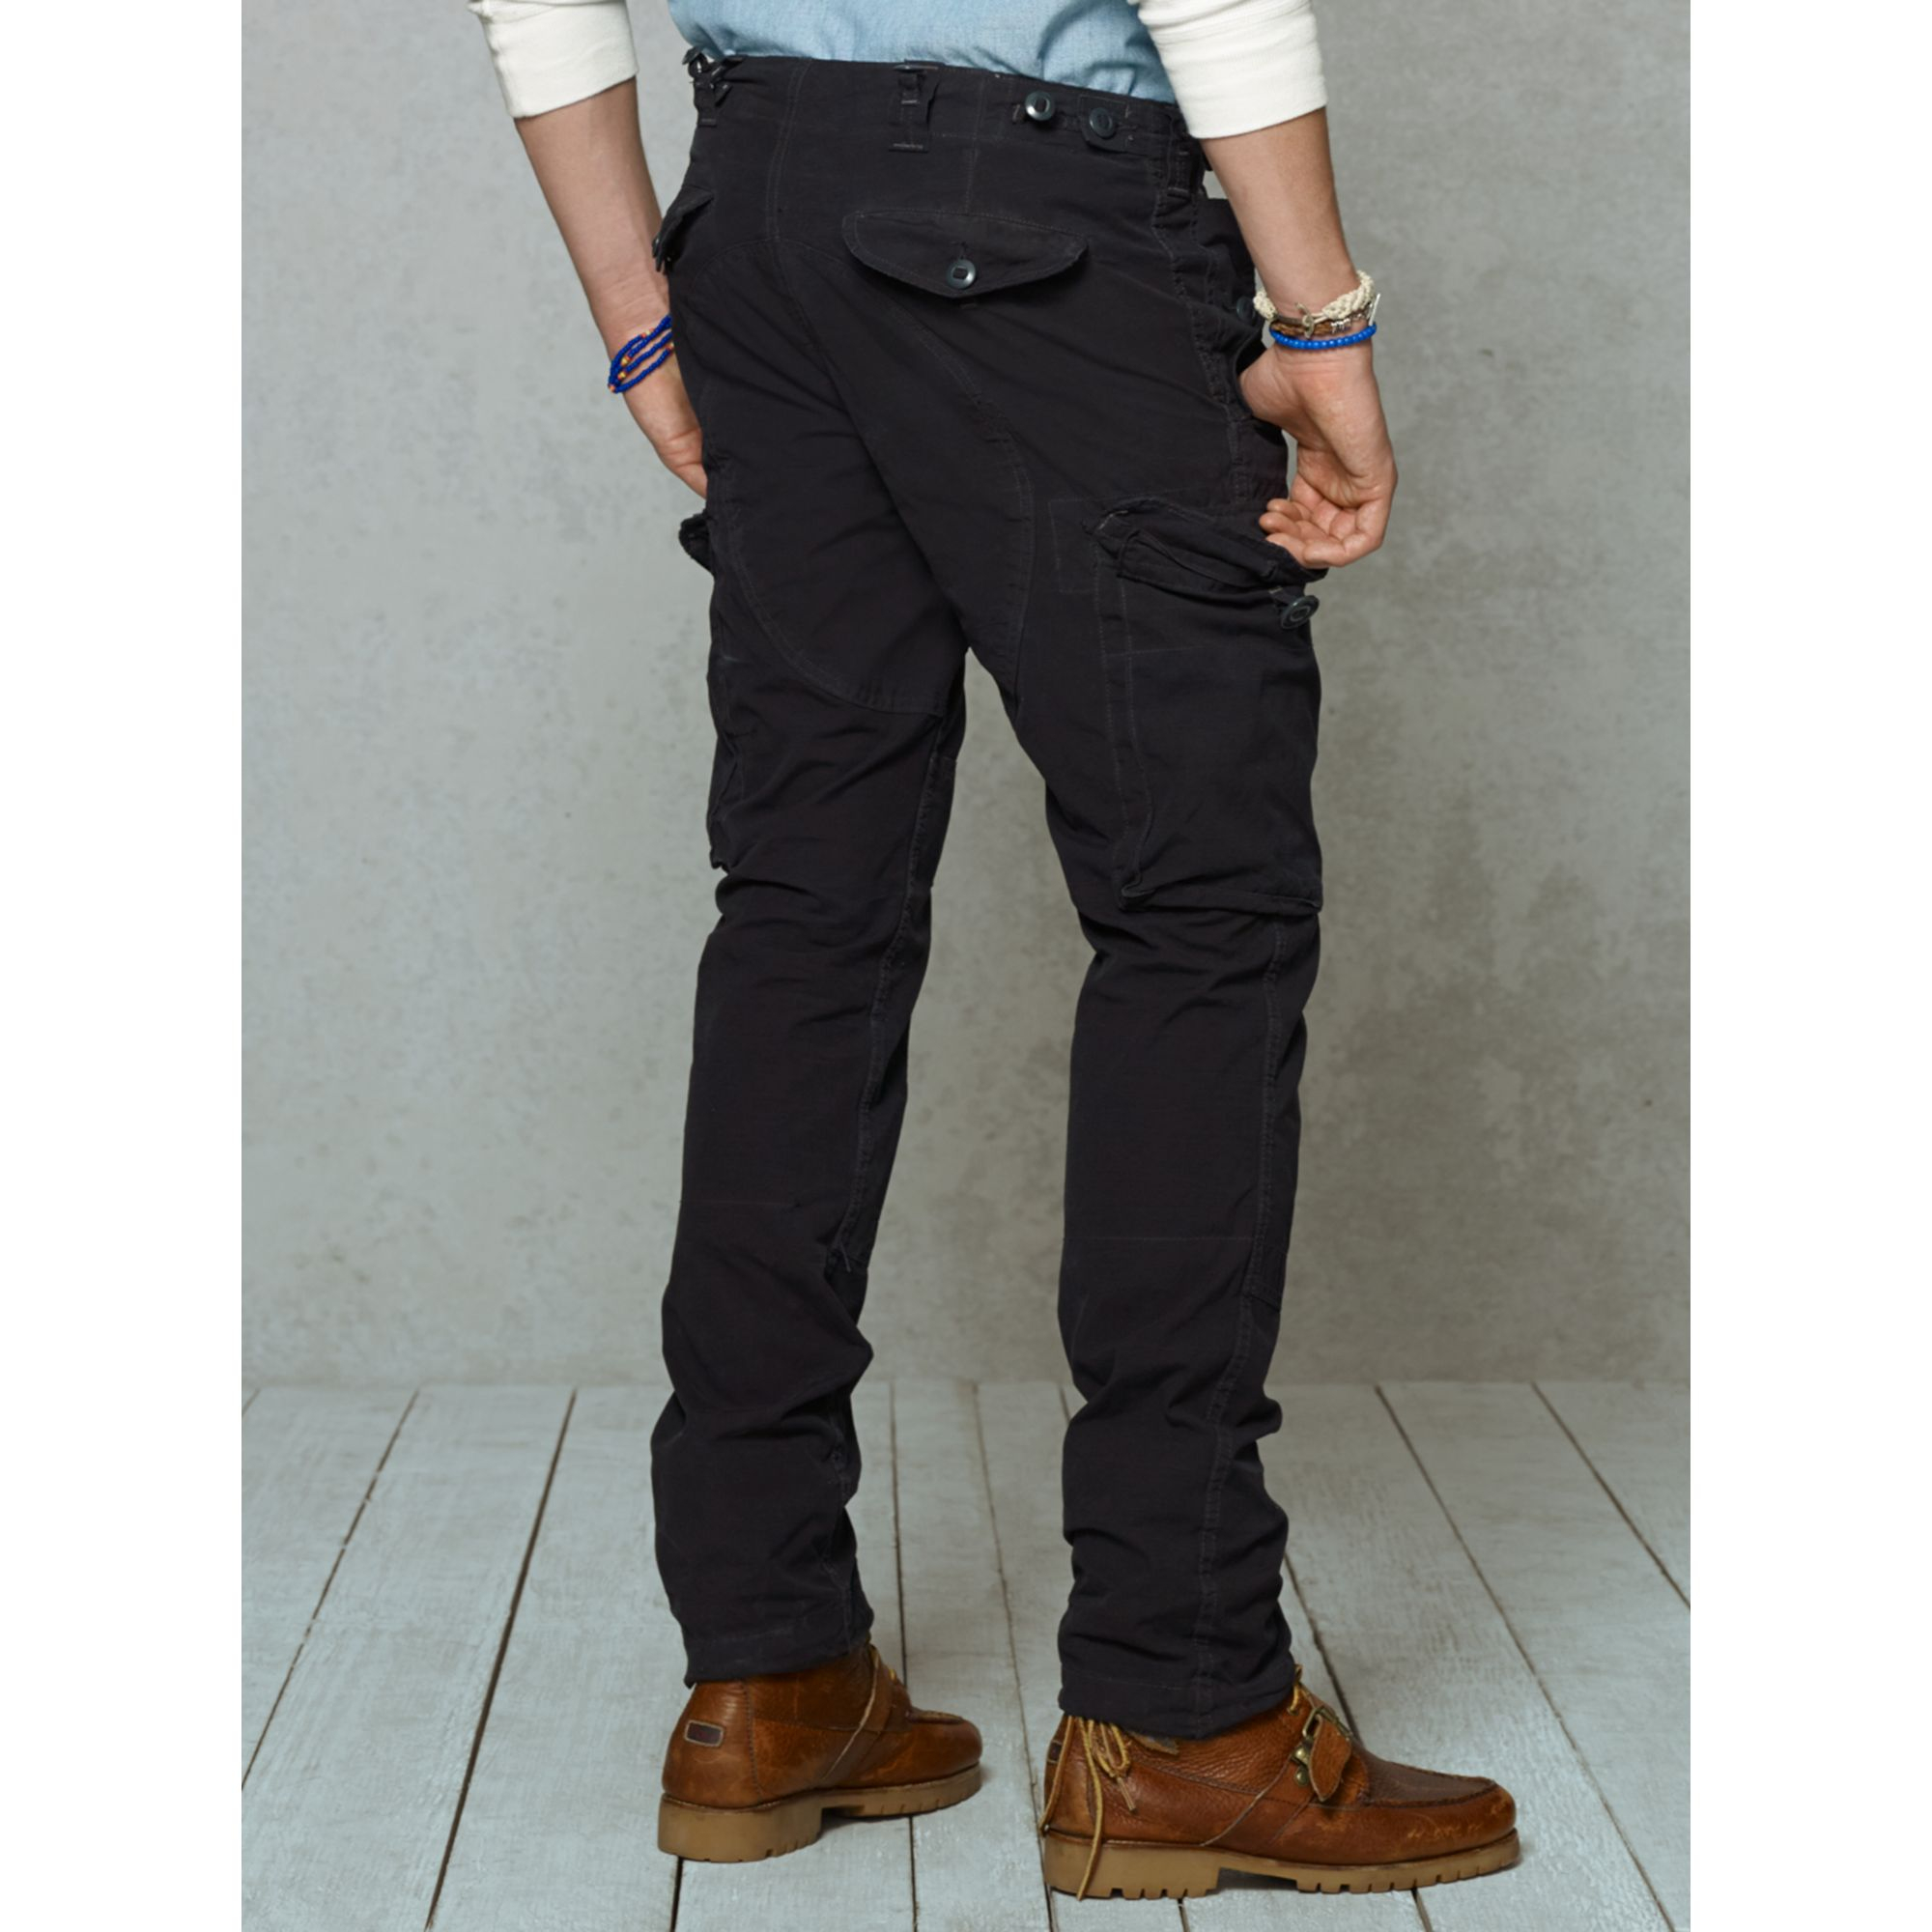 Lyst - Polo Ralph Lauren Straight-fit Cargo Pant in Black for Men